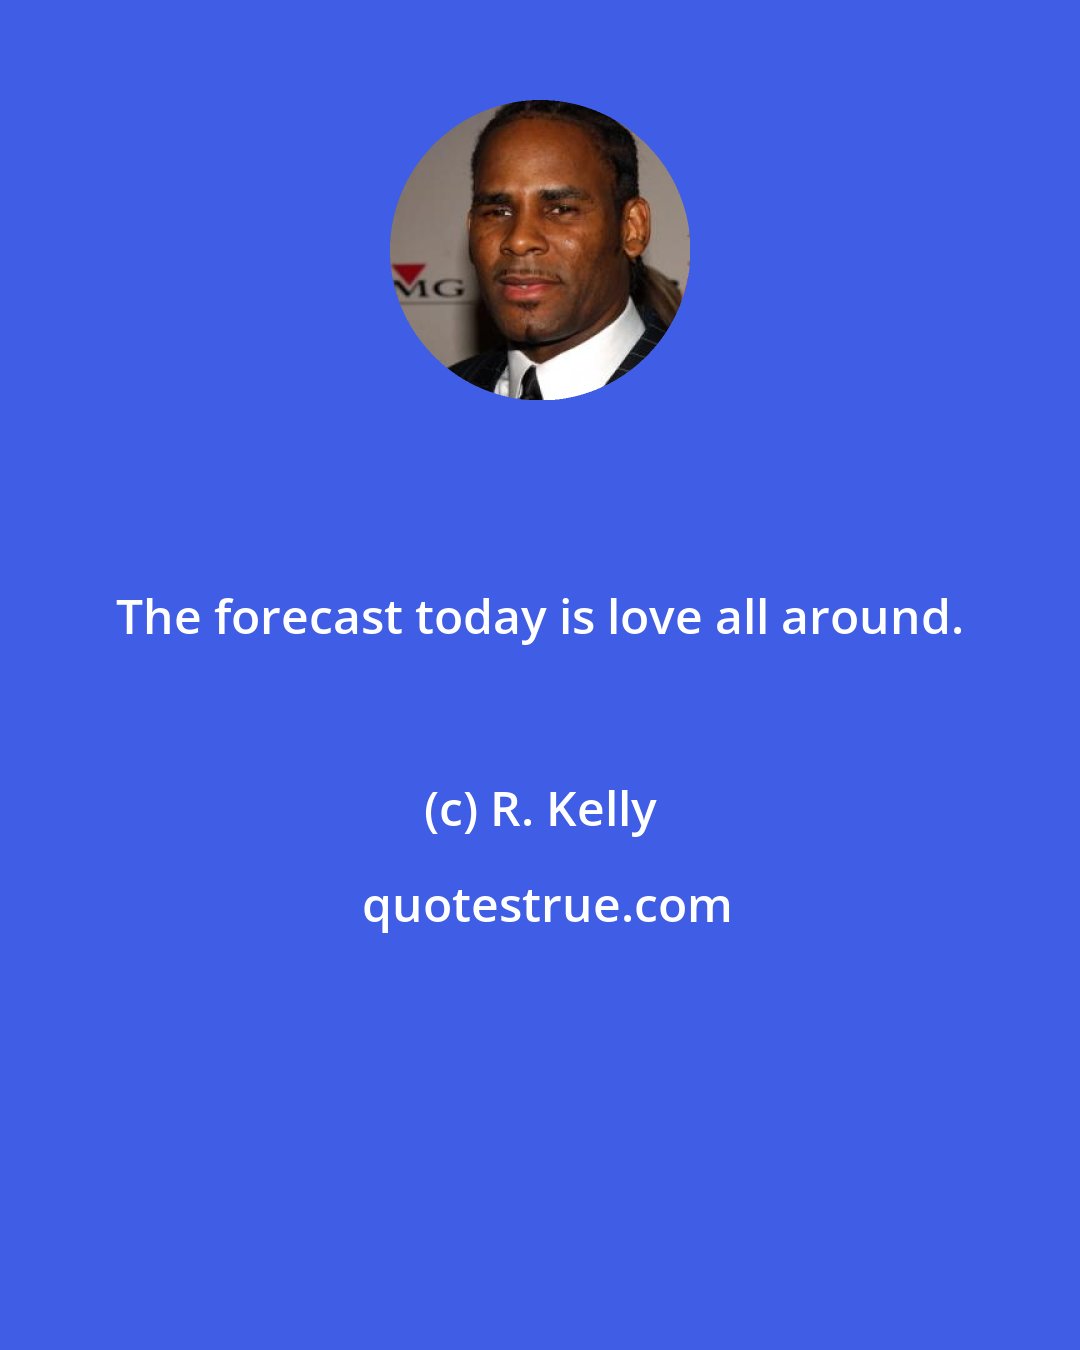 R. Kelly: The forecast today is love all around.